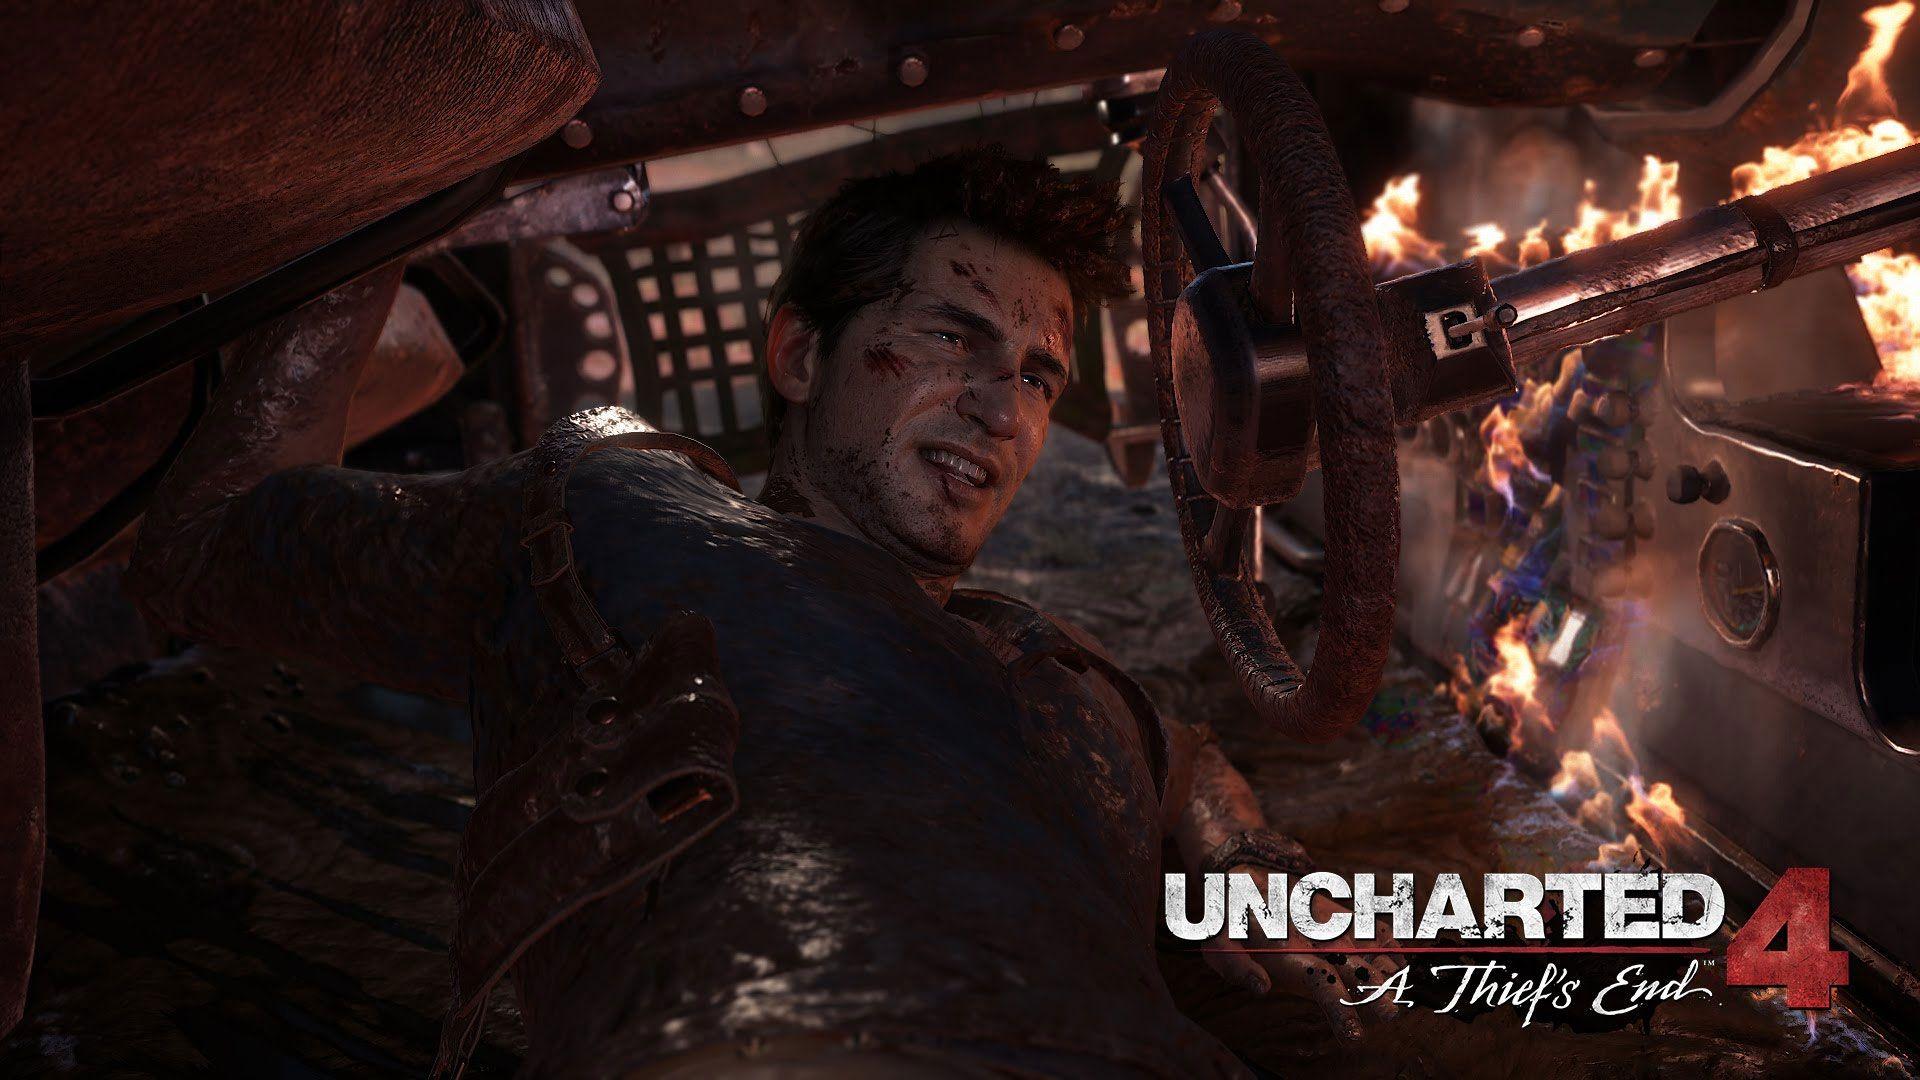 Uncharted 4 1080P, 2K, 4K, 5K HD wallpapers free download | Wallpaper Flare